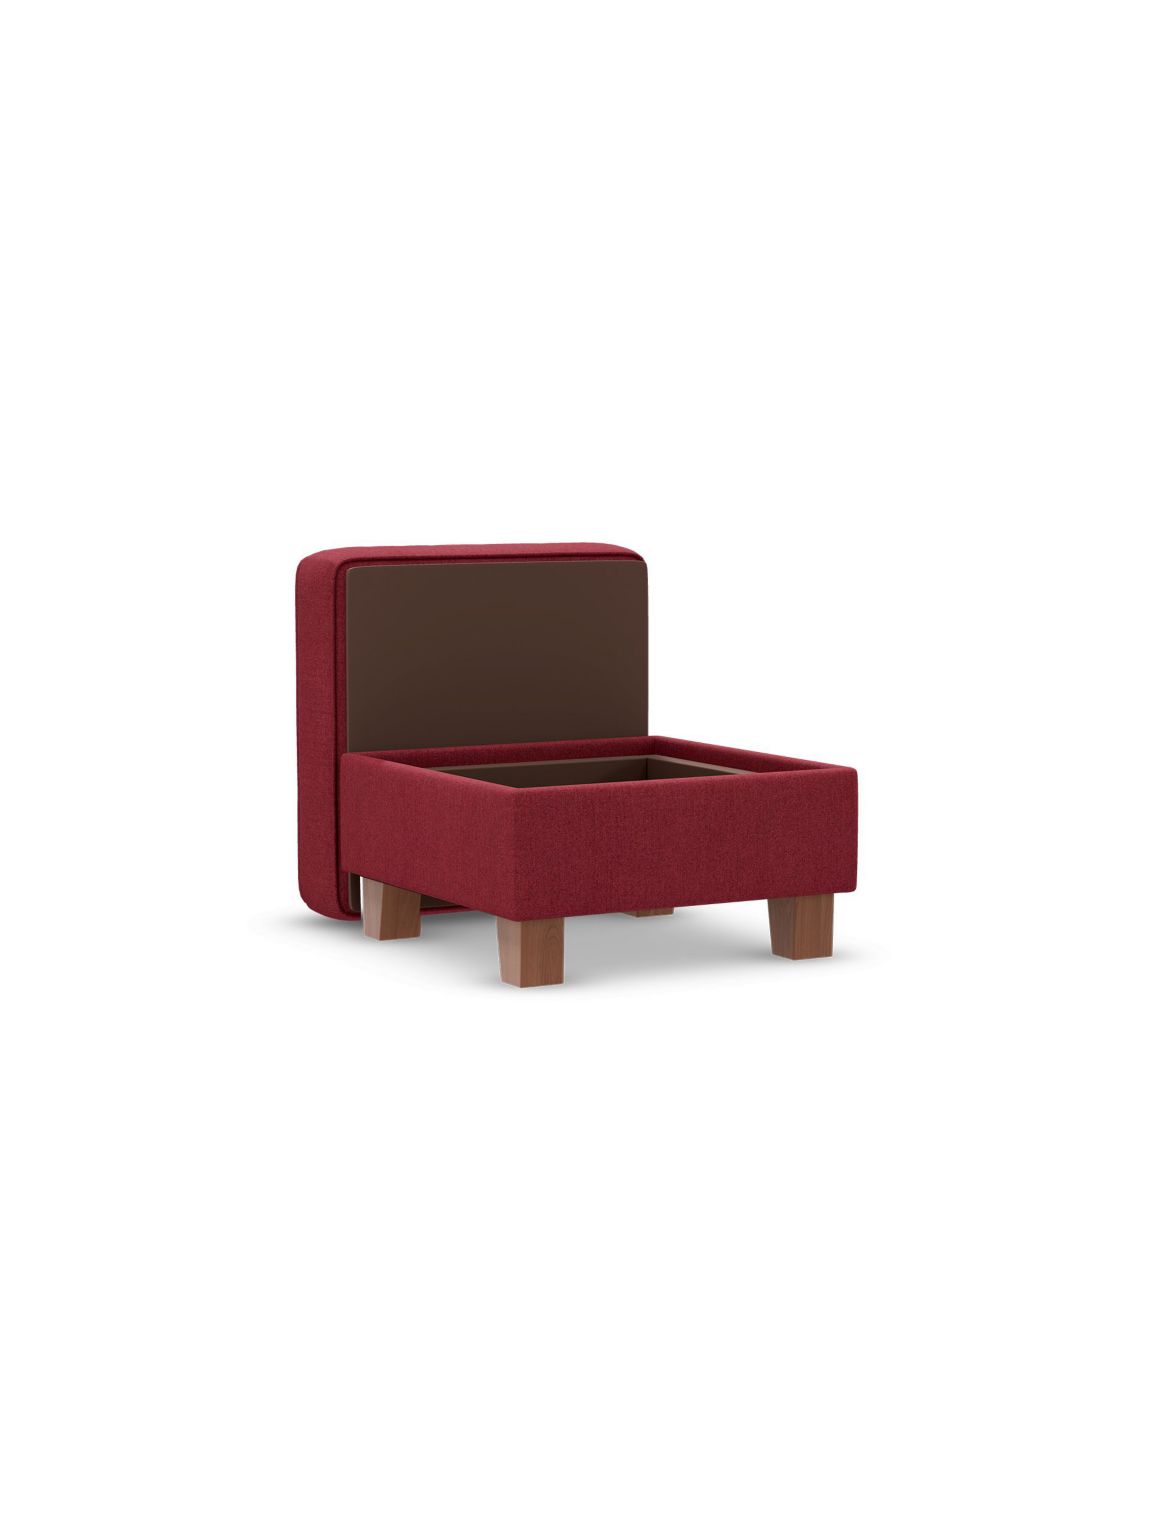 Small Storage Footstool red